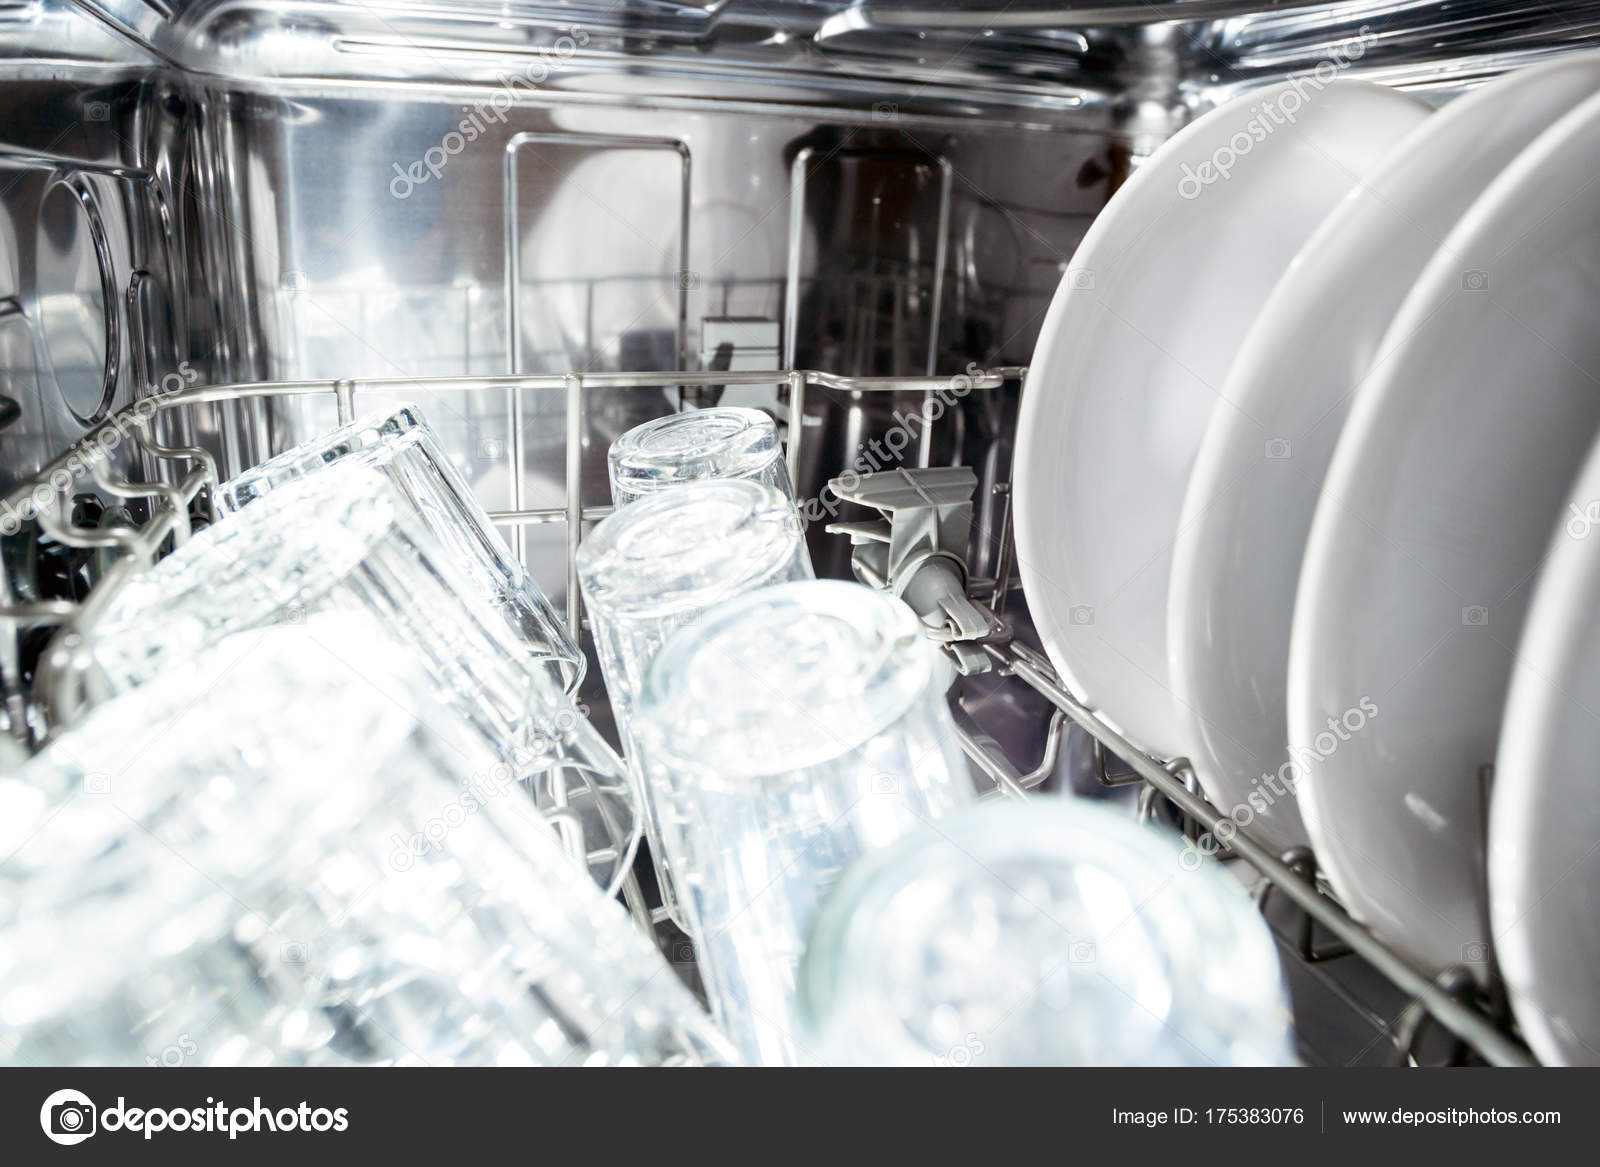 Interior Of Dishwasher Machine With Clean Dishes Stock